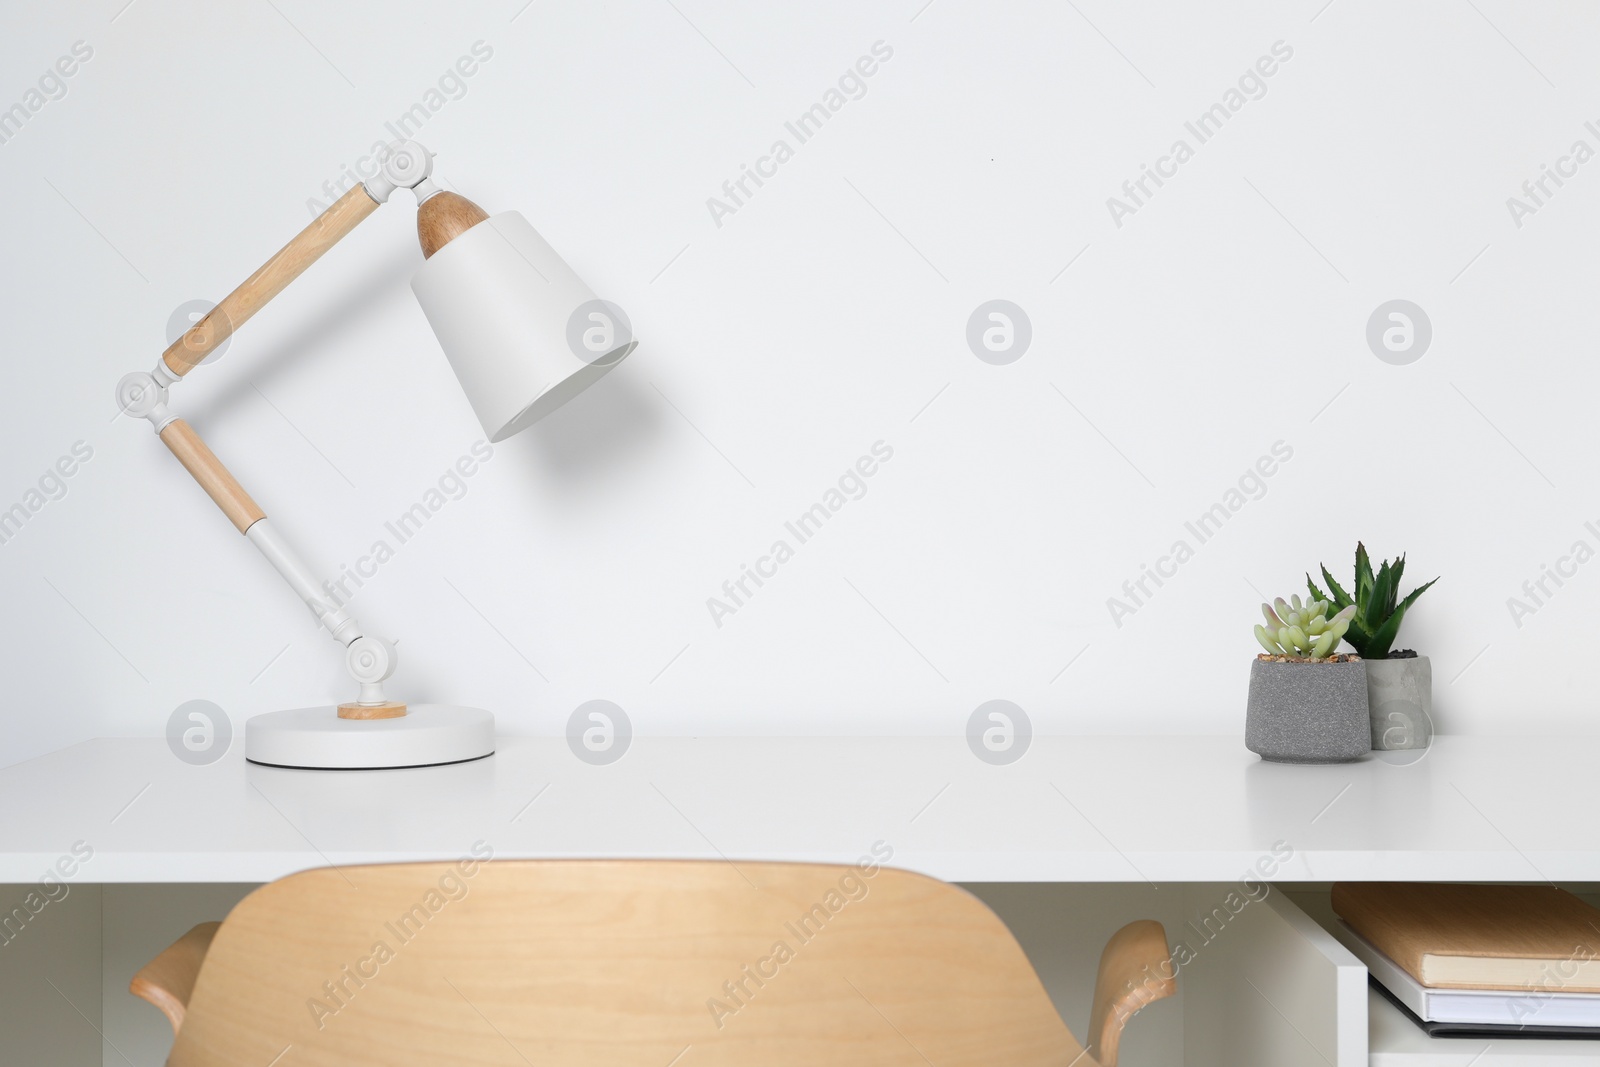 Photo of Stylish modern desk lamp and potted succulents on table near white wall indoors